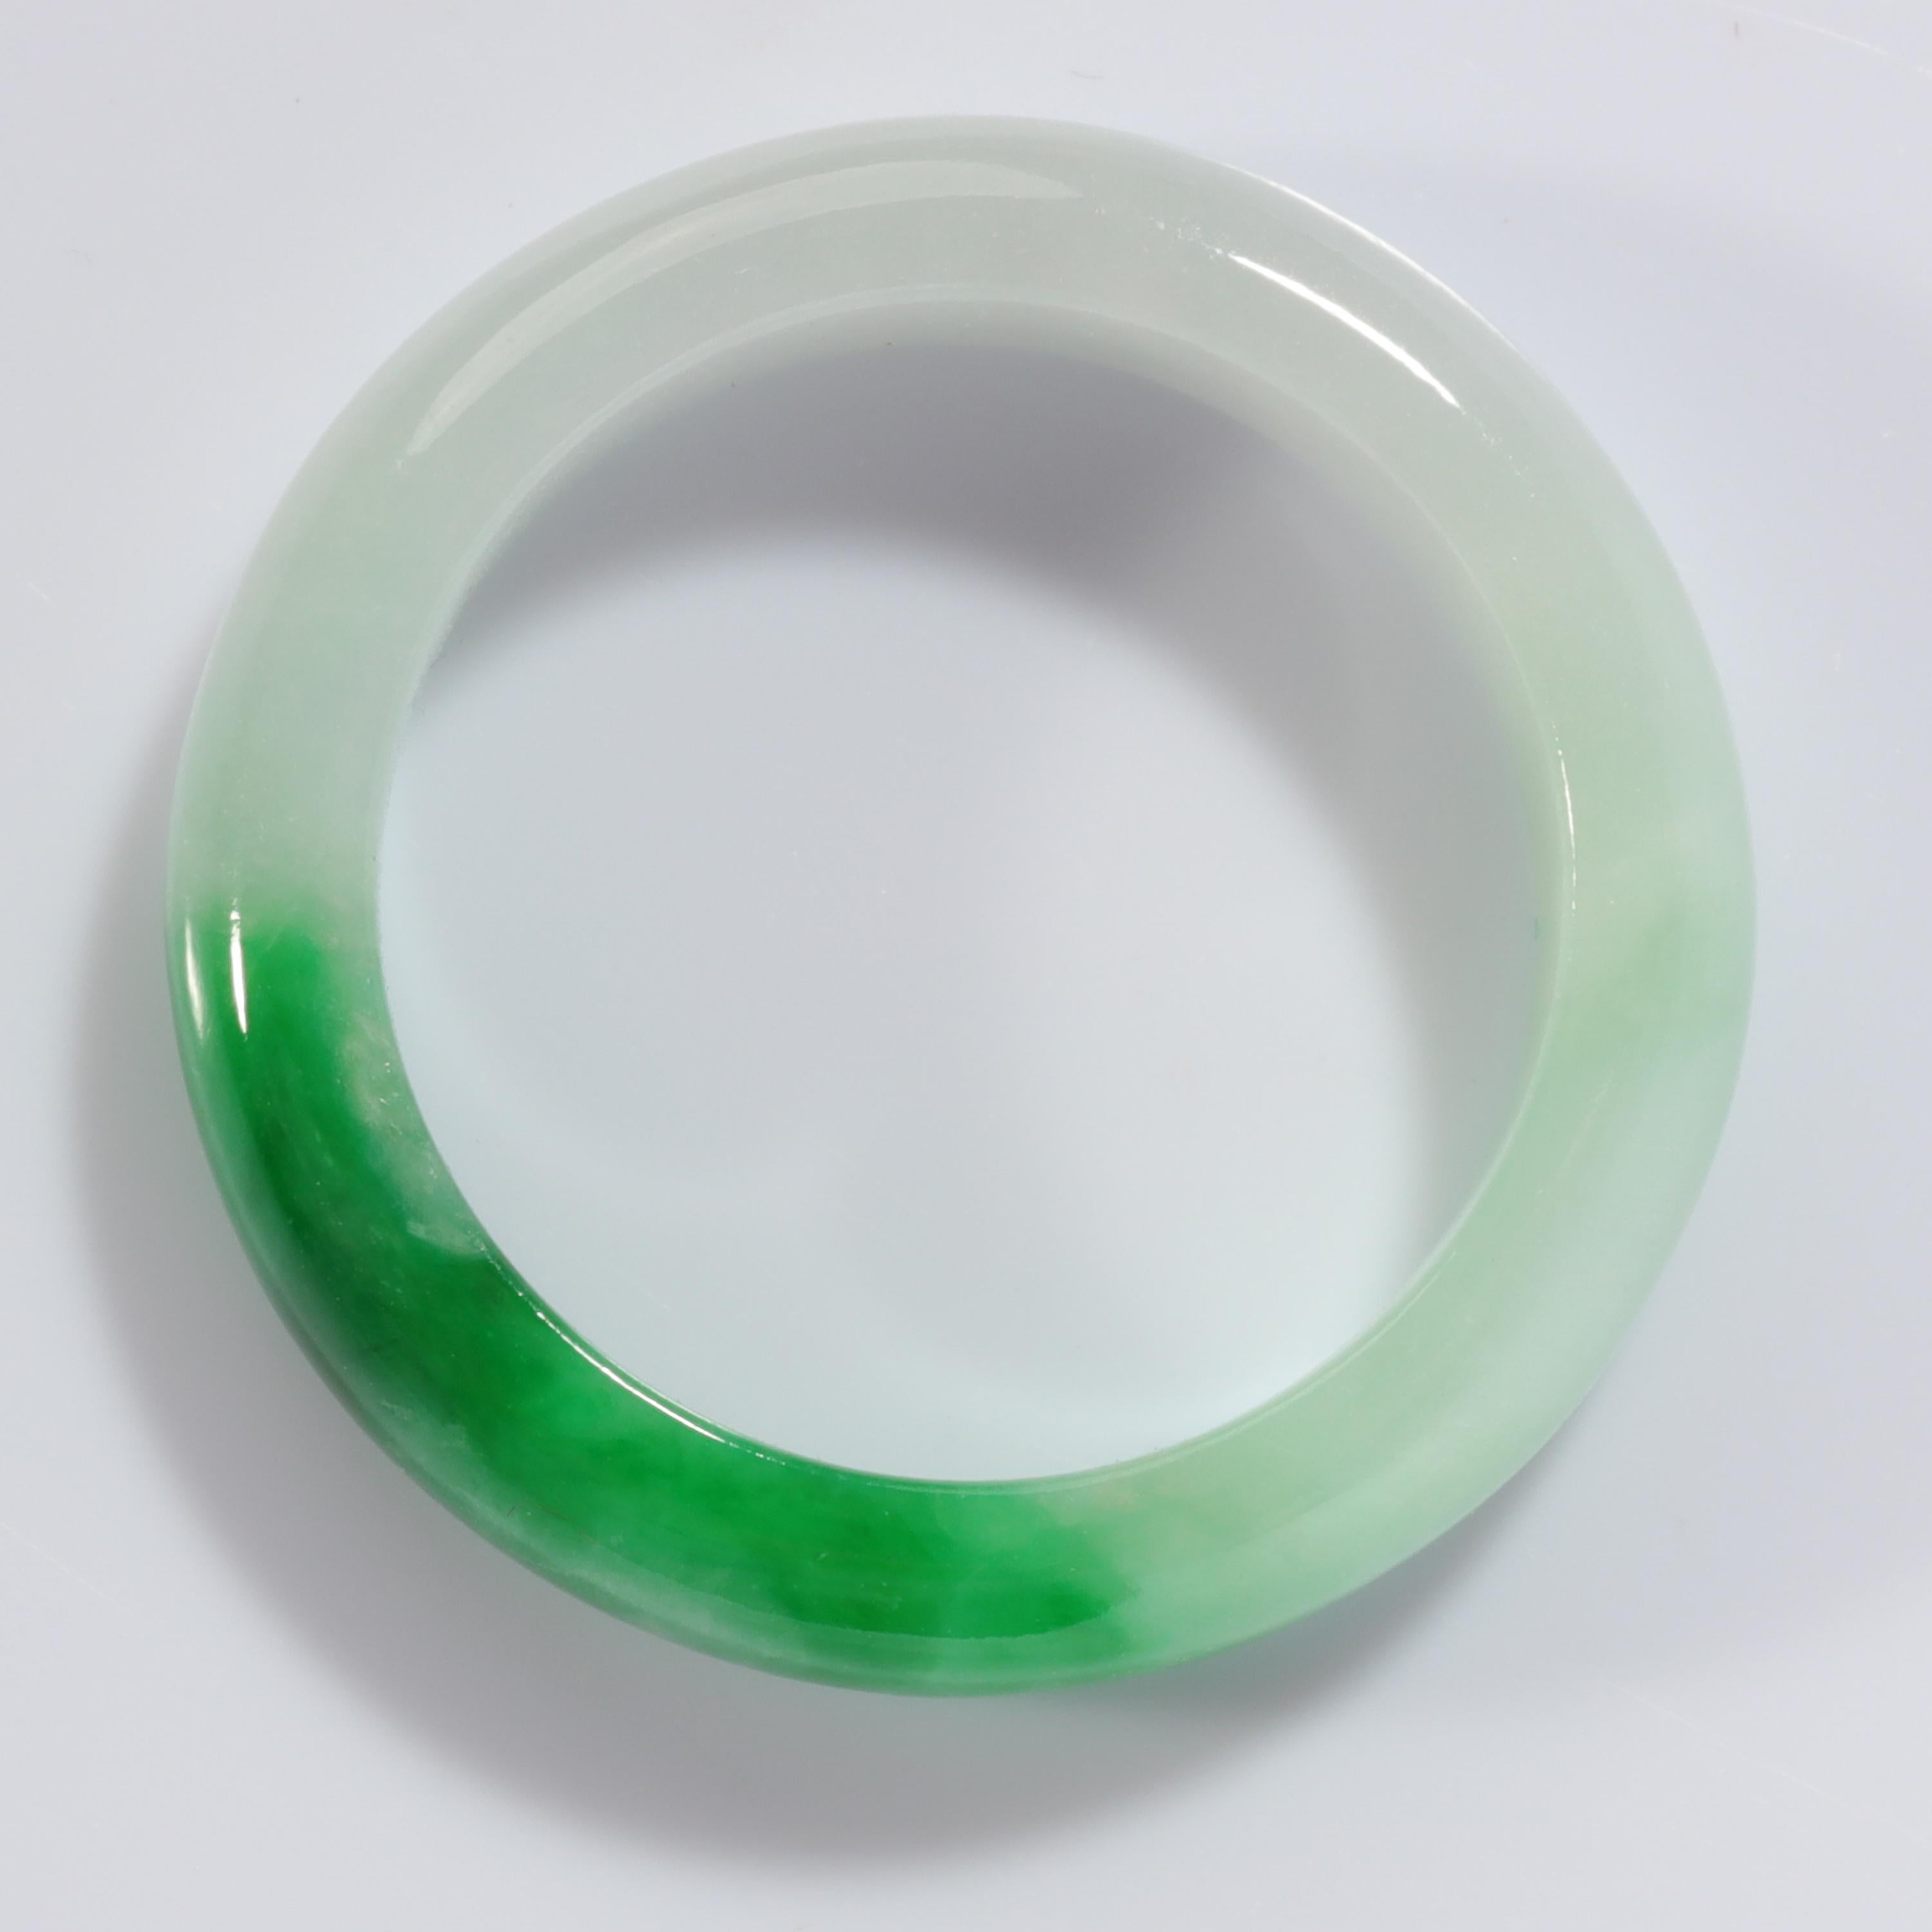 A pristine, never worn band of finely colored and translucent green makes for a most strikingly unique, beautiful, and durable wedding band. Or un-wedding band. Or stack ring. Or just the ring you buy yourself because you require a bump of